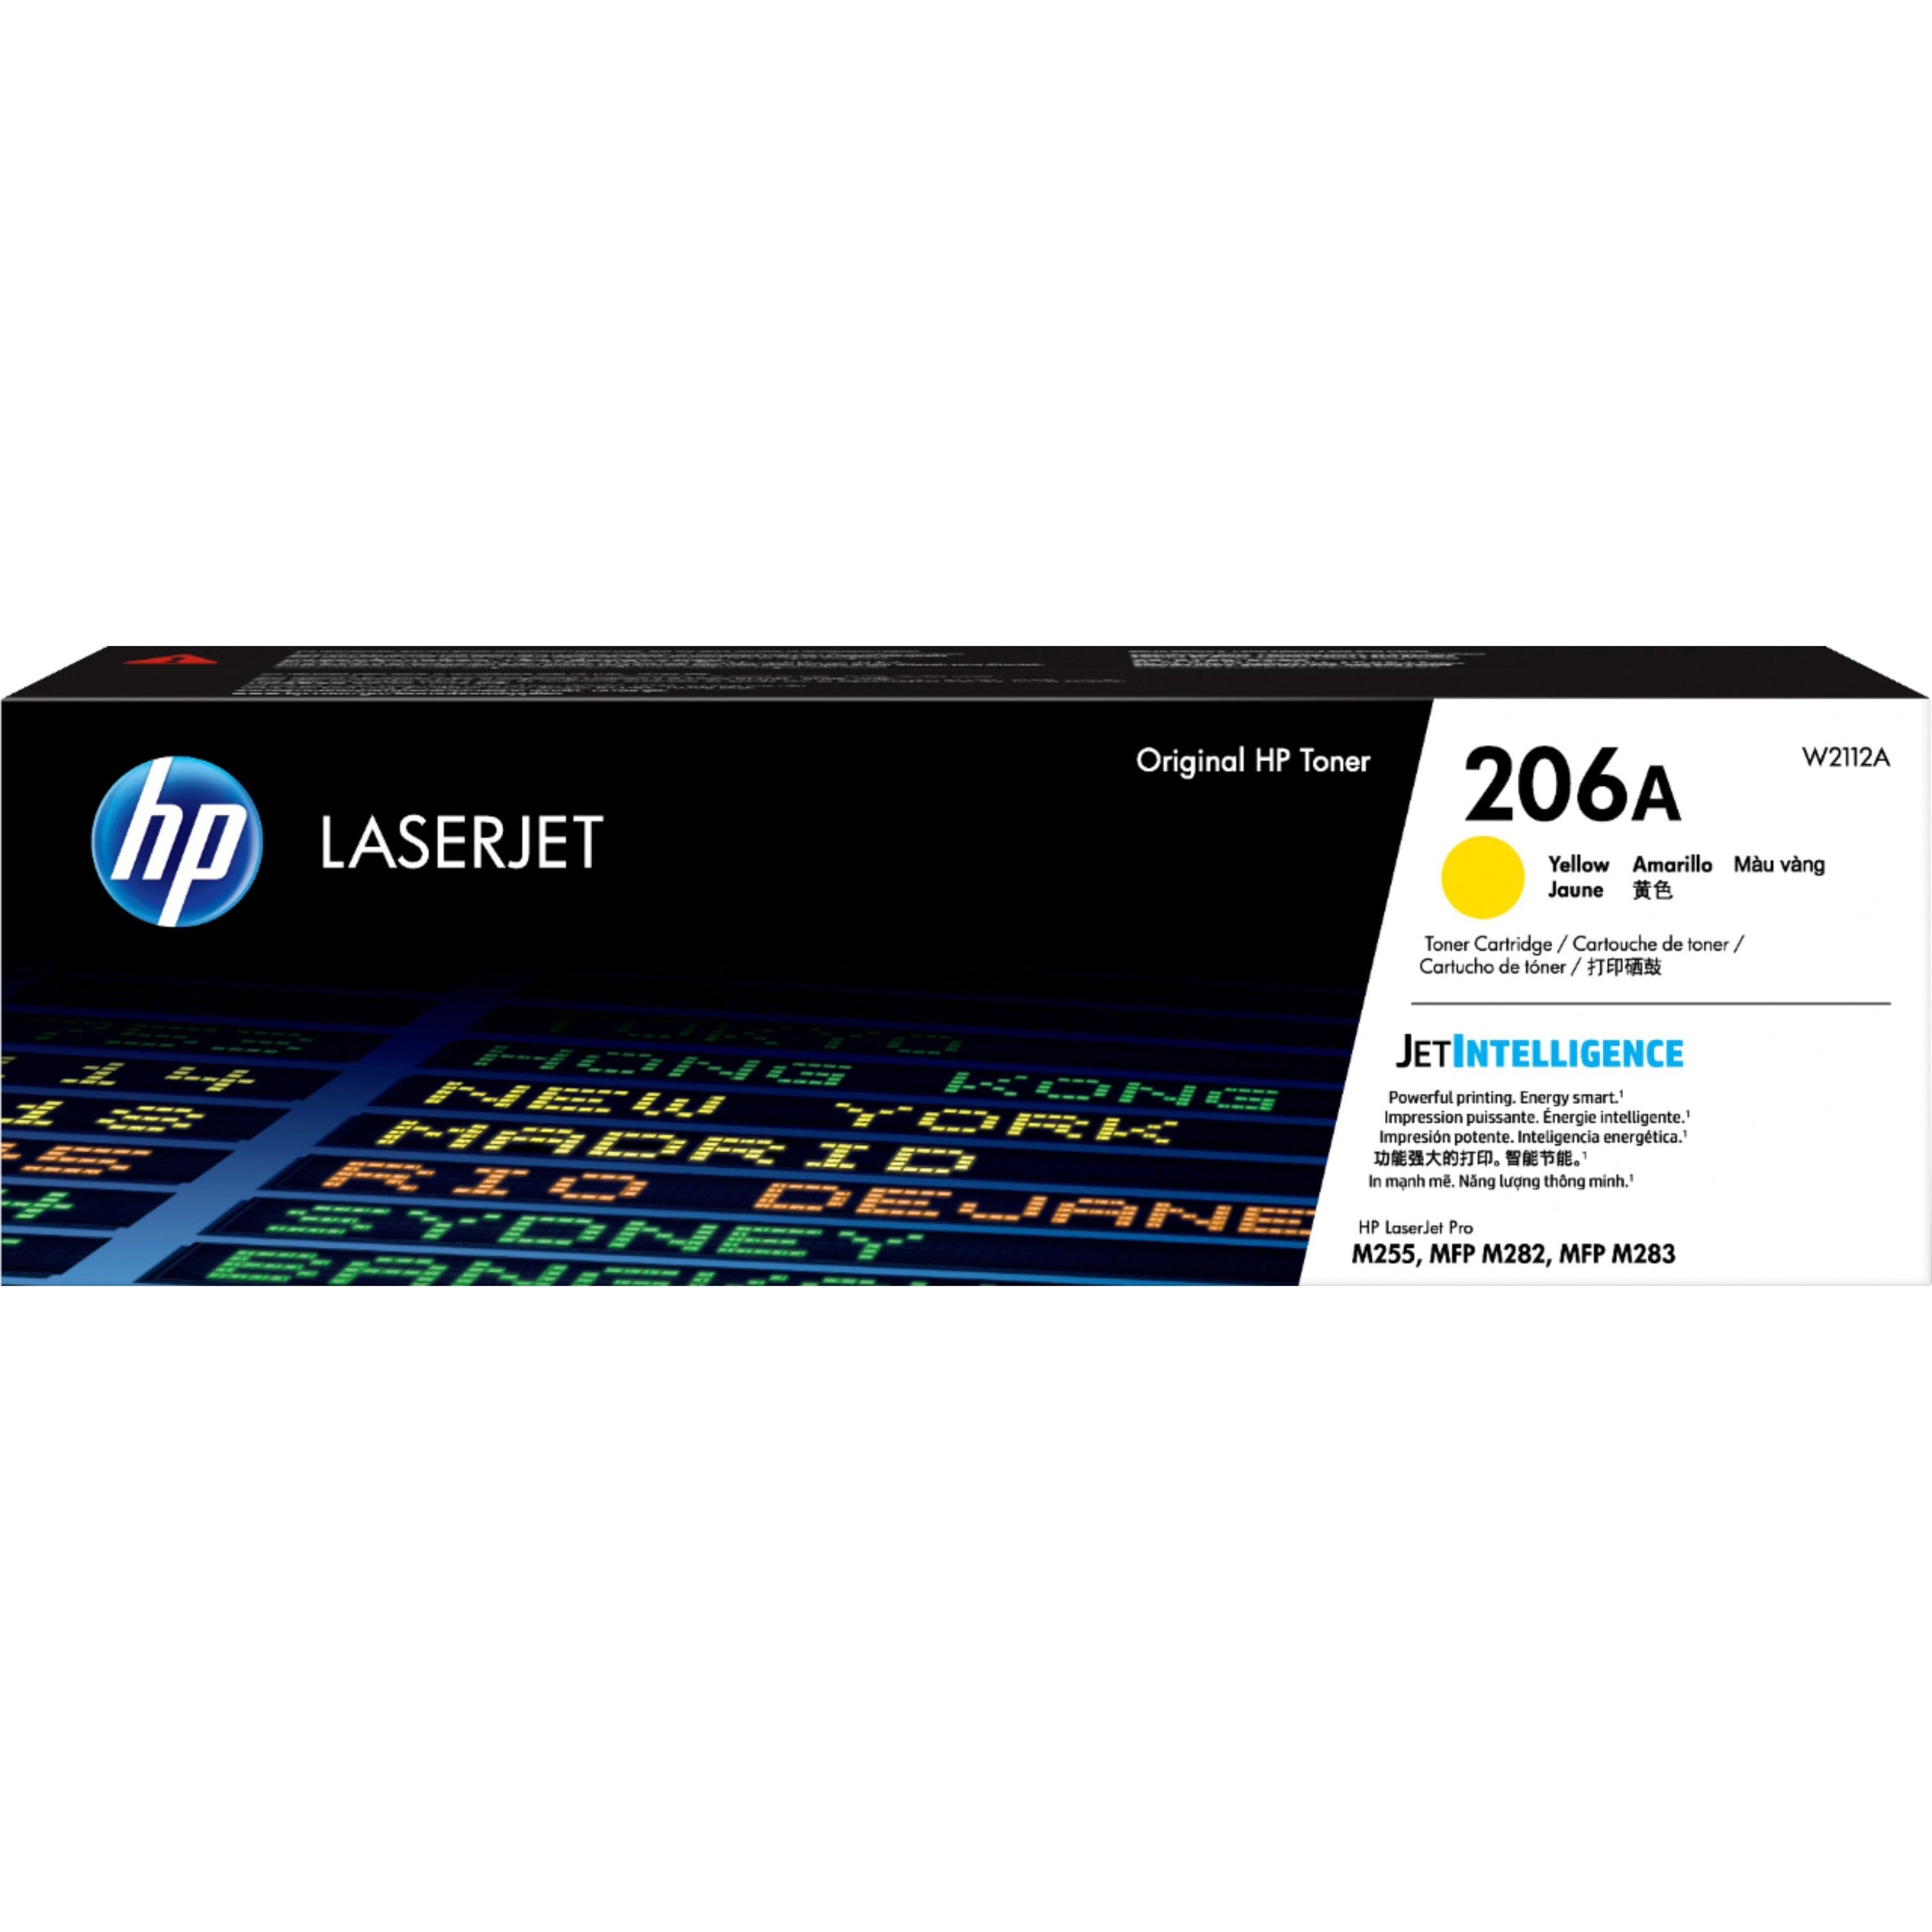 hp-206a-original-laser-toner-cartridge-yellow-1-each-1250-pages_heww2112a - 1